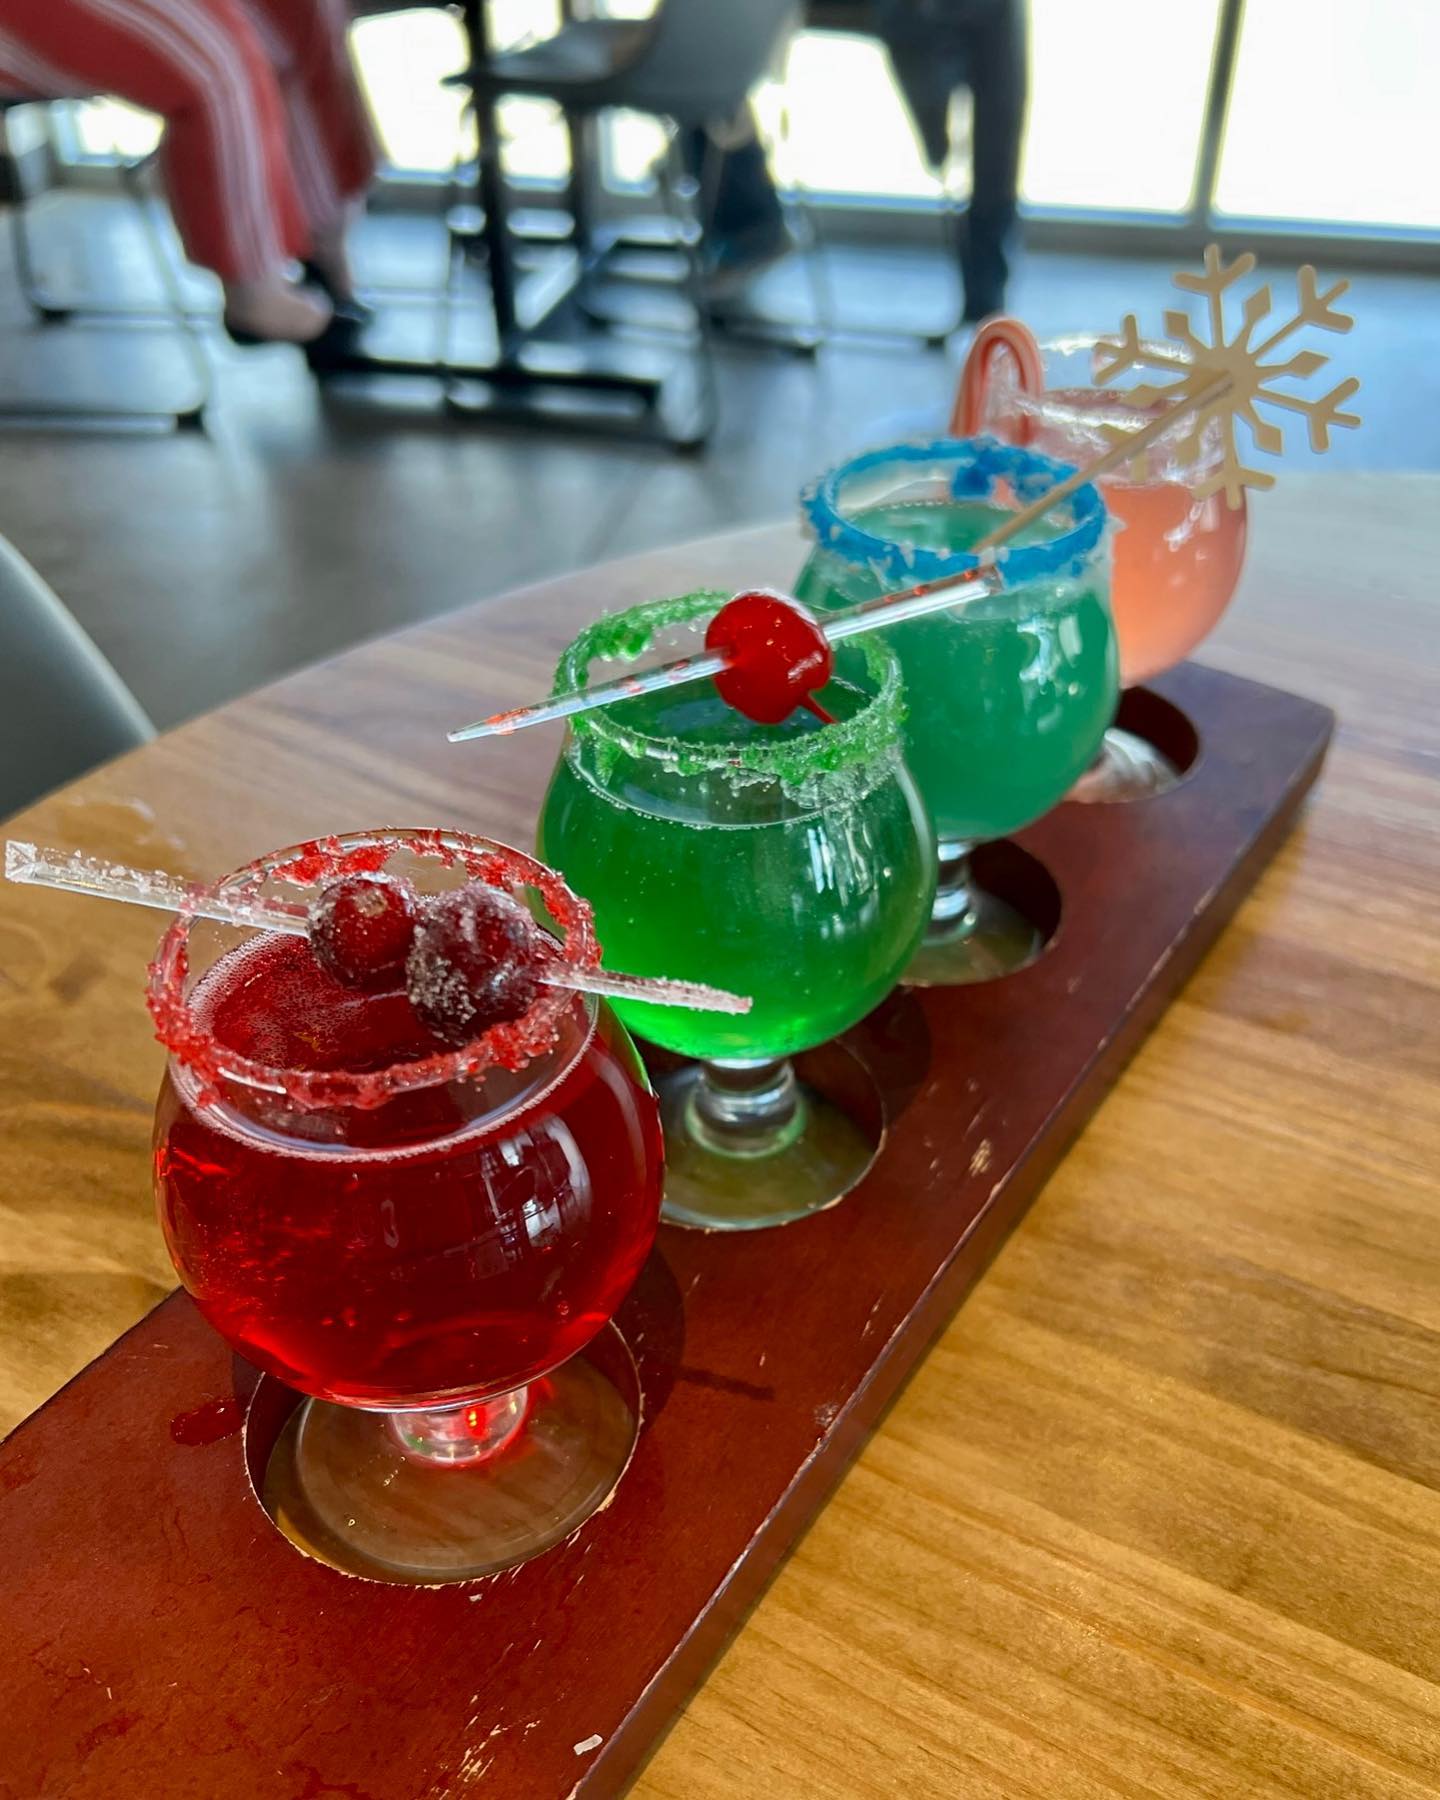 We’re loving the holiday mimosa flights at @saucyfocaccia! Flavors are cranberry, candycane, green apple and pinacolada 🎄